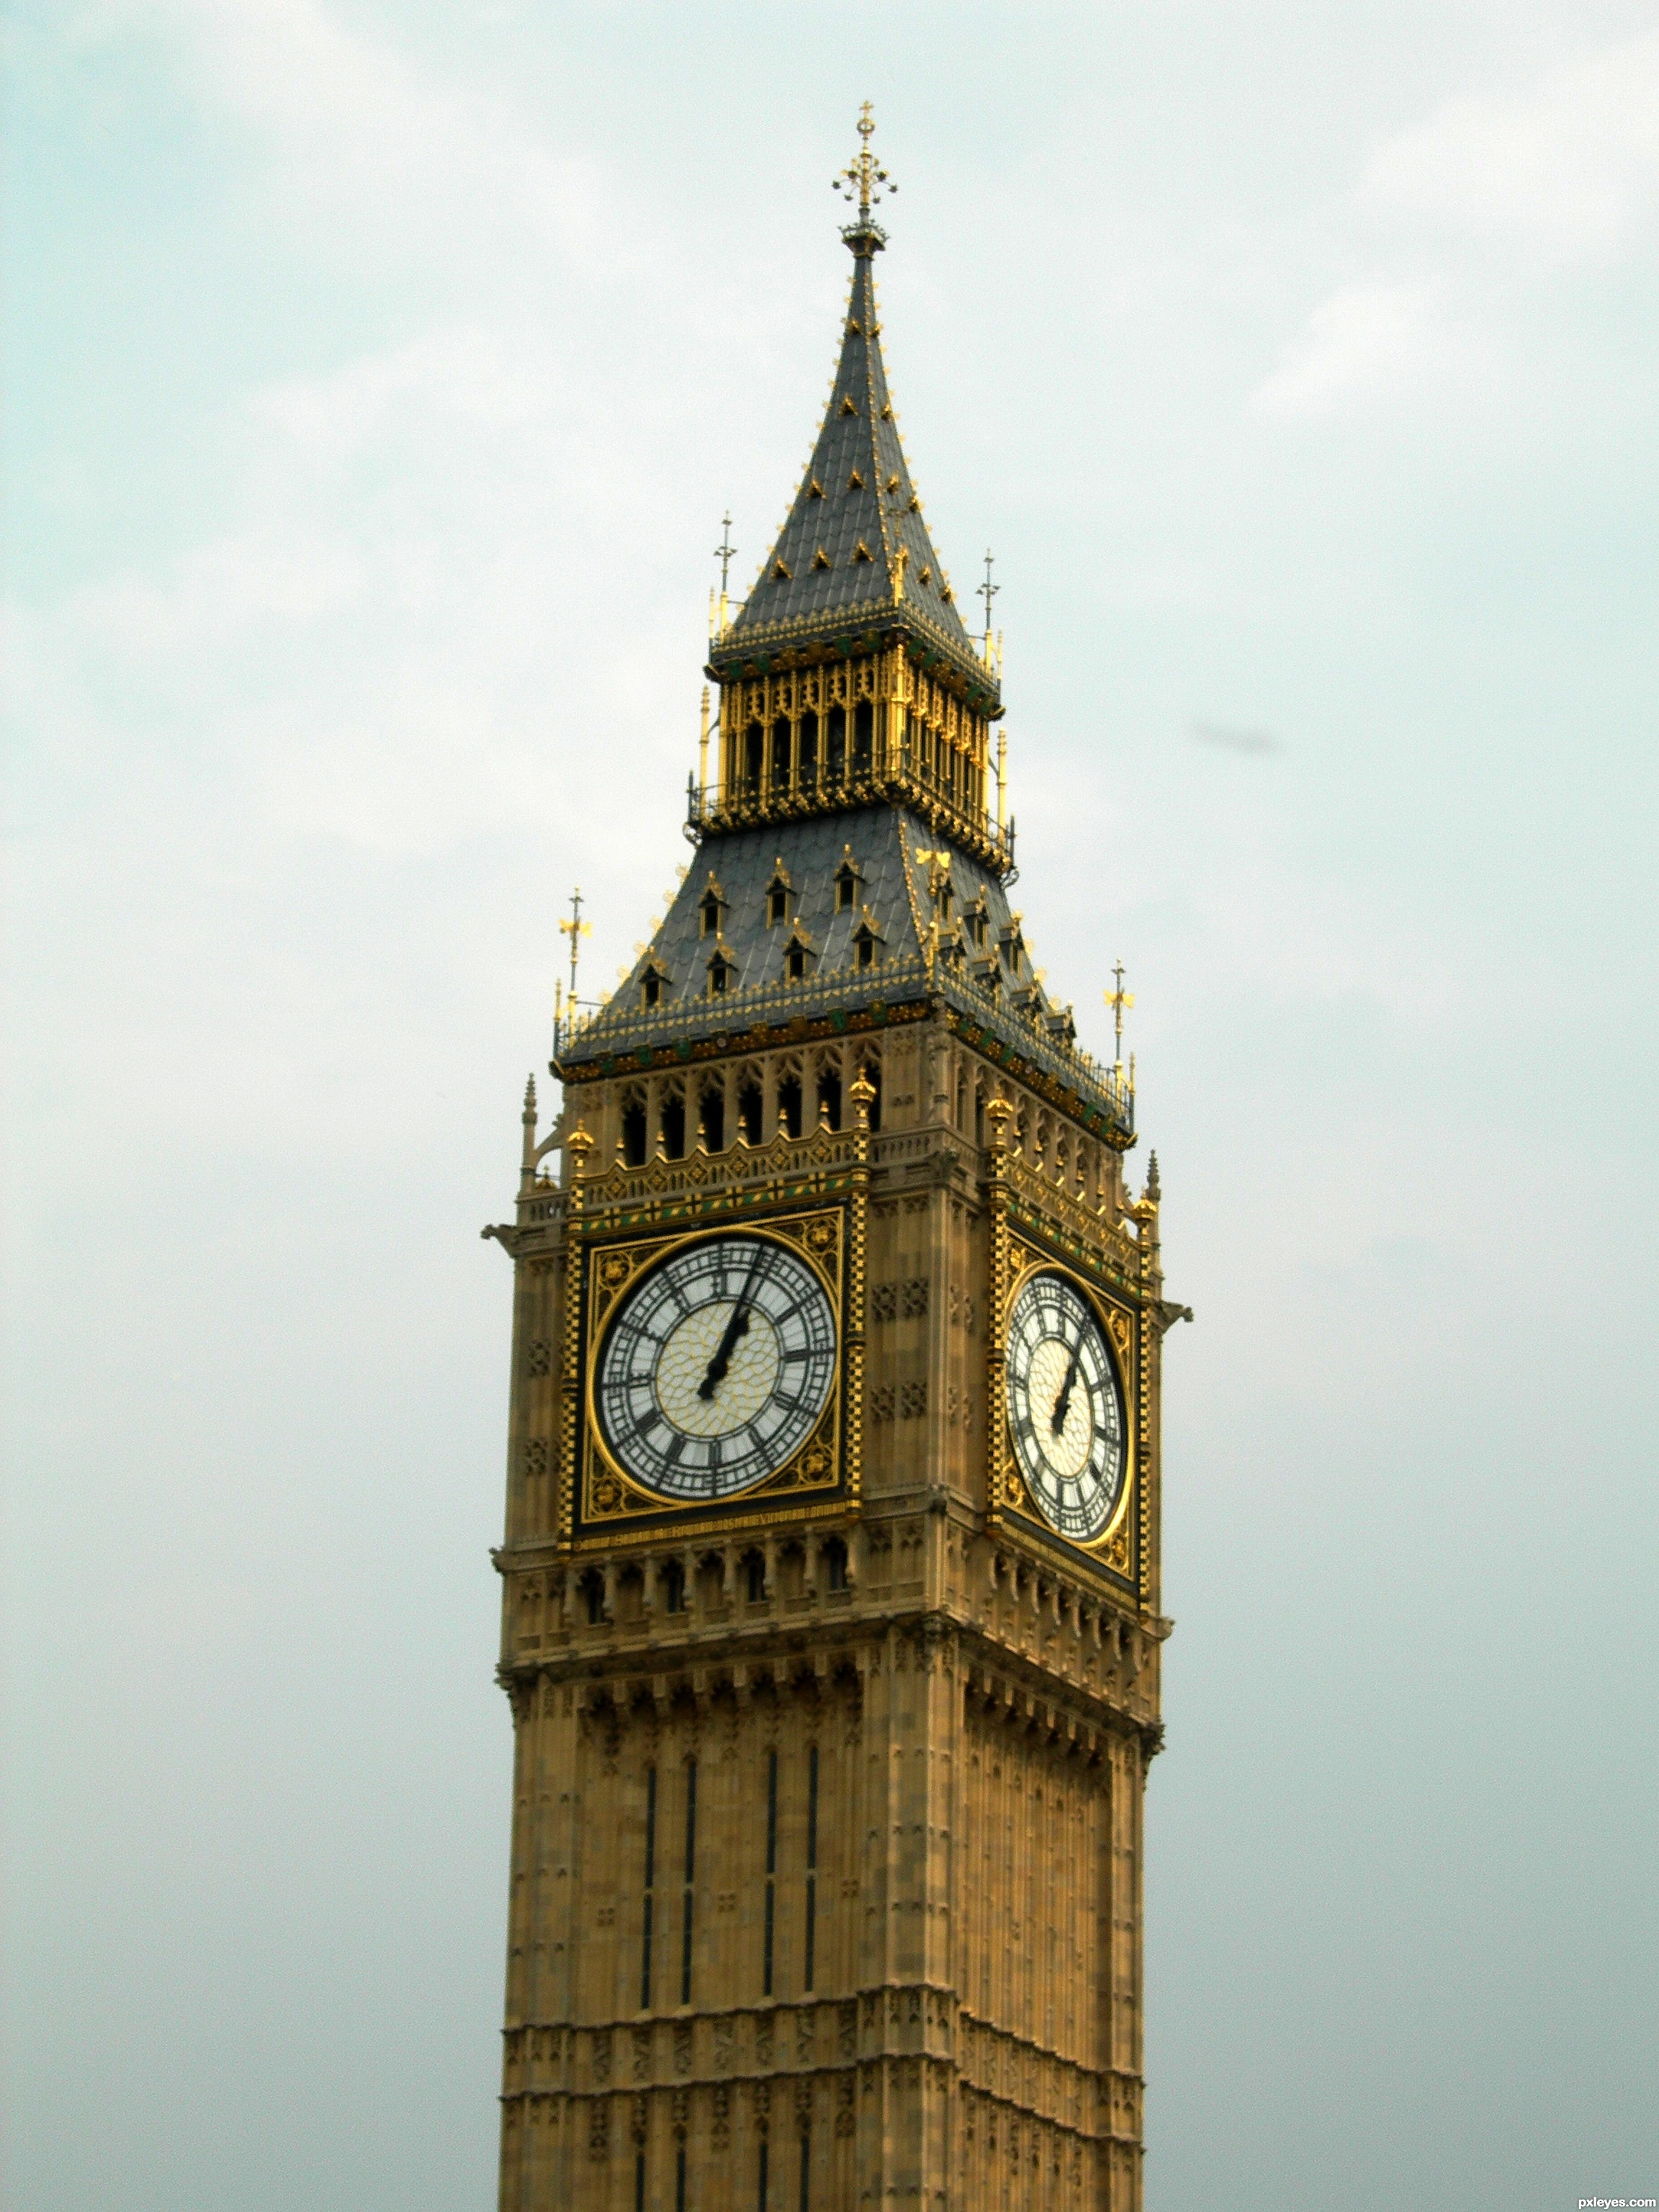 Big Ben picture, by rbrum for: clocks photography contest - Pxleyes.com